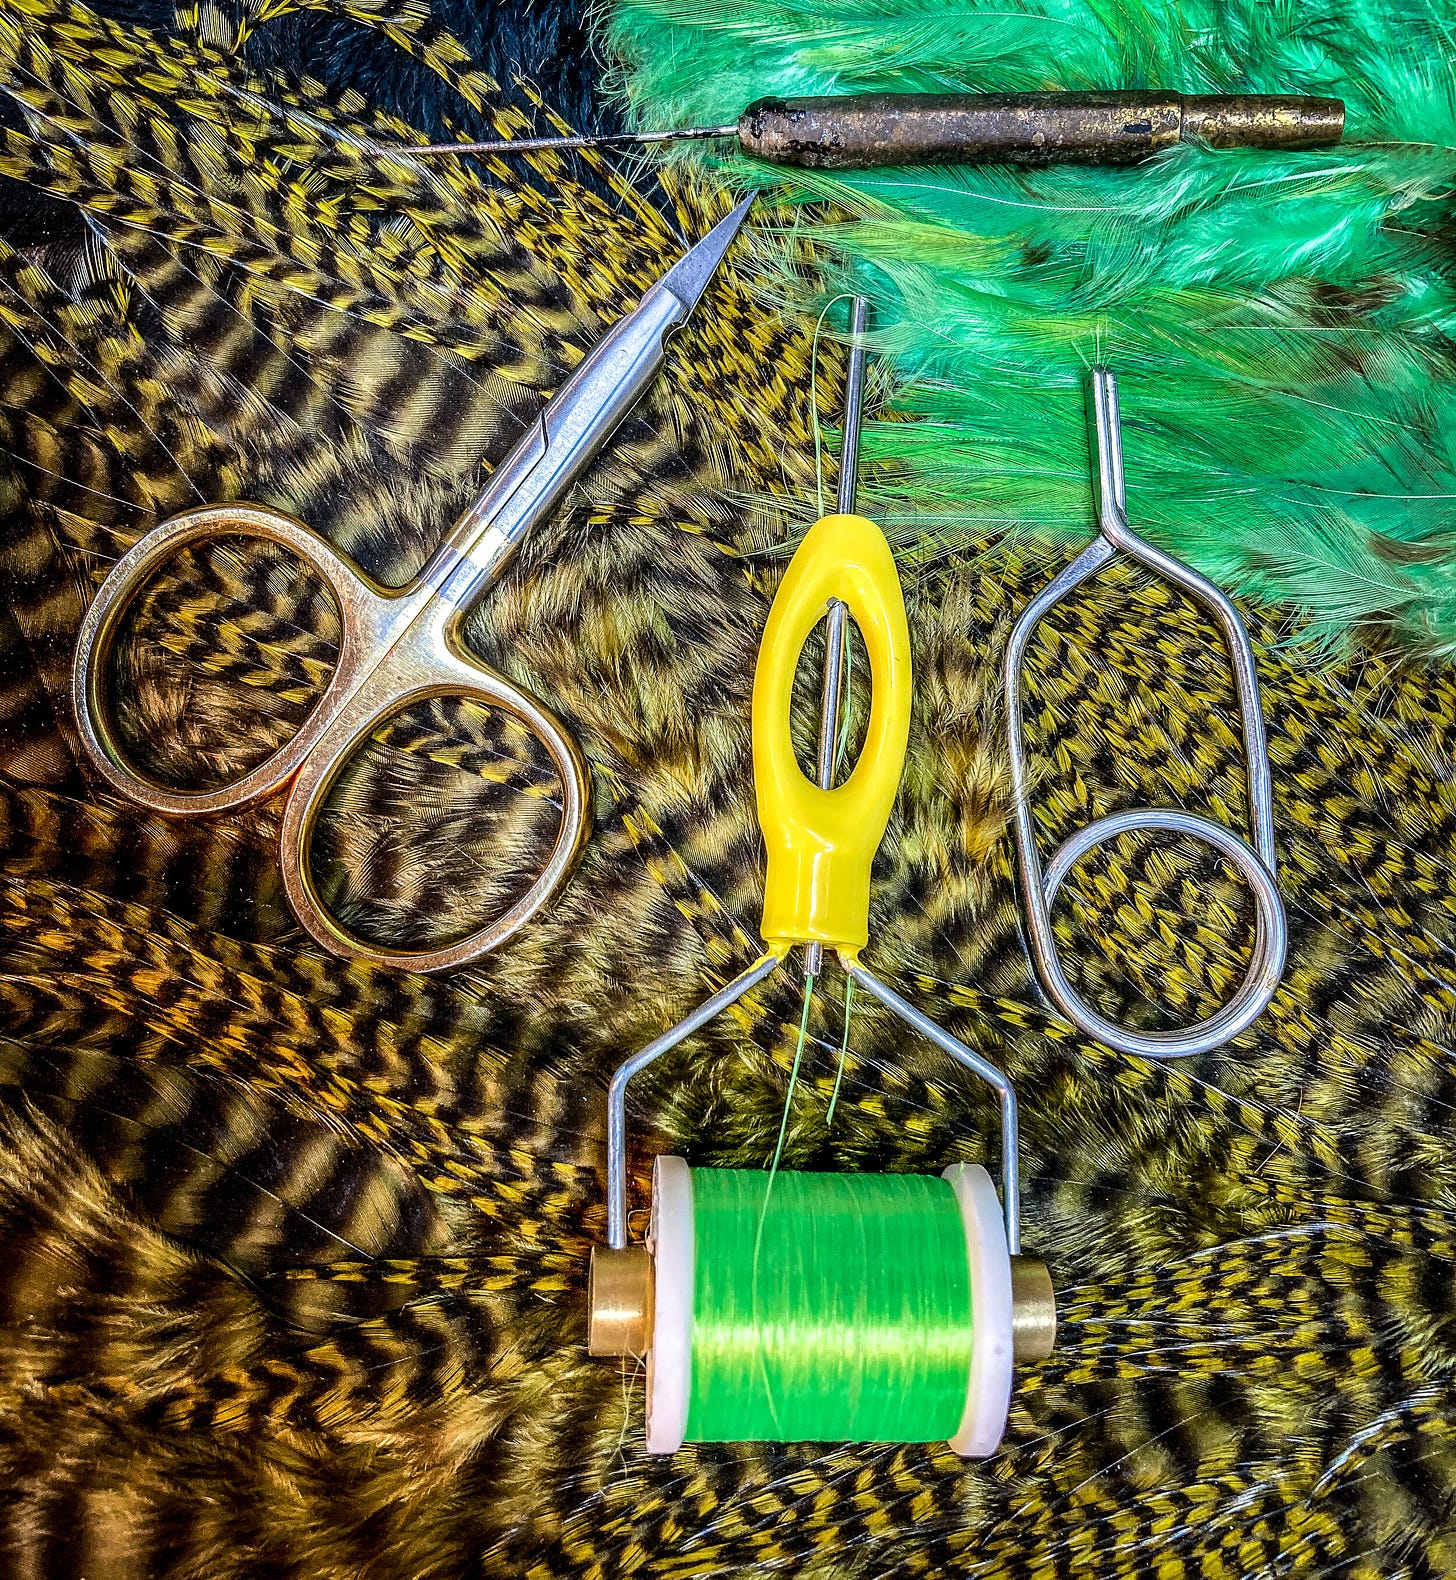 Basic tying tools (counter-clockwise from top, left): scissors, bobbin, hackle pliers and (well-used) bodkin. [Photo: Dean Shadley]